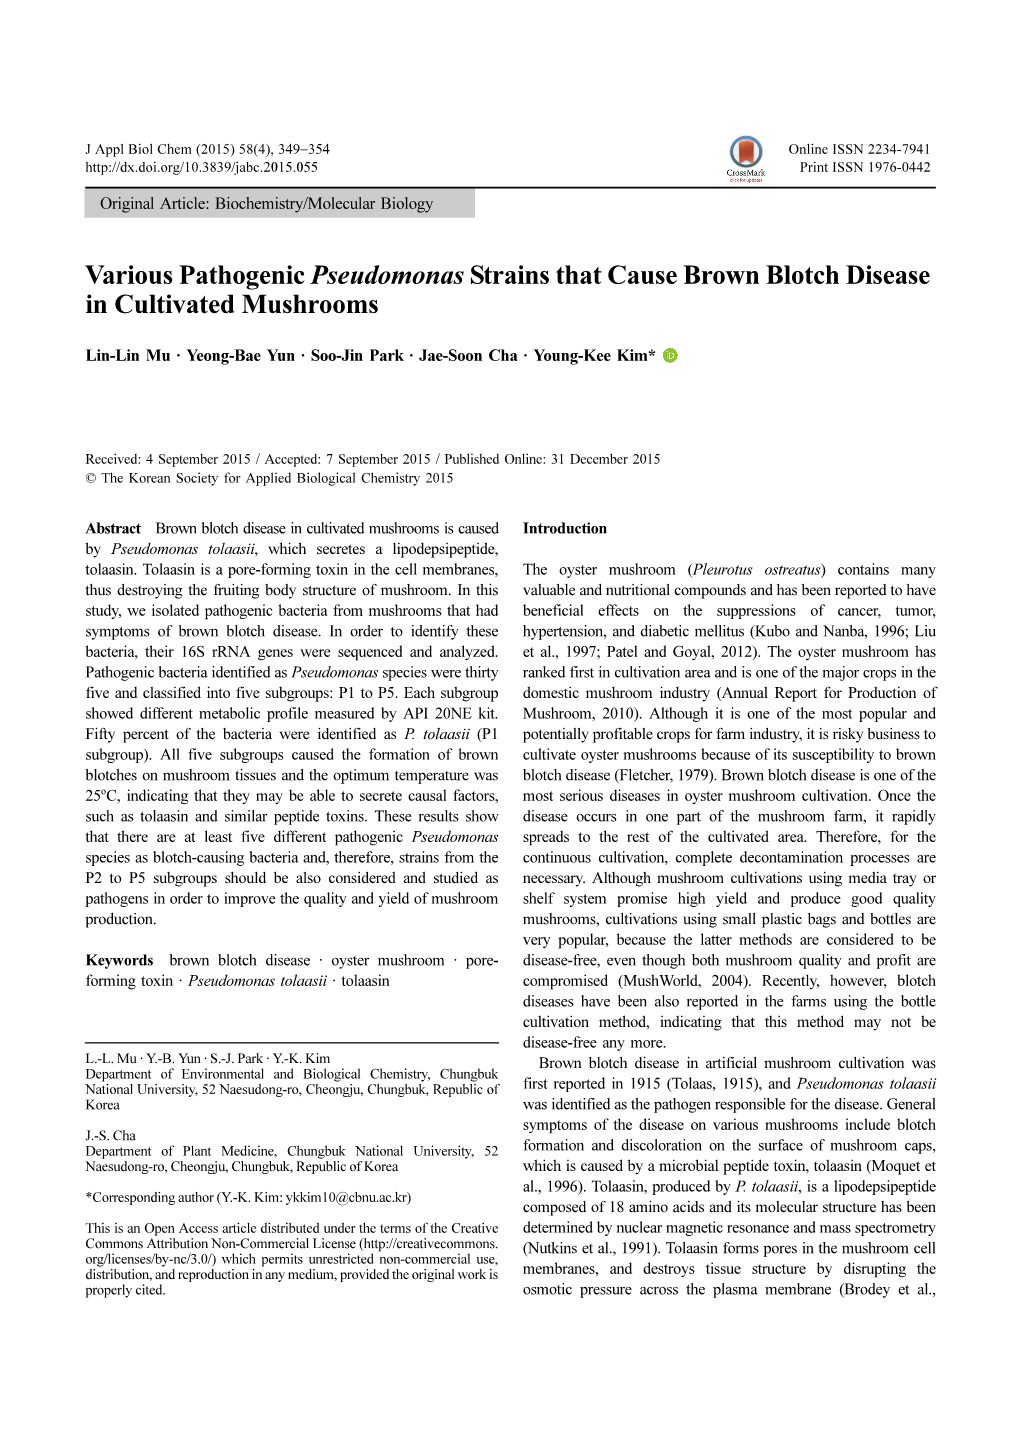 Various Pathogenic Pseudomonas Strains That Cause Brown Blotch Disease in Cultivated Mushrooms